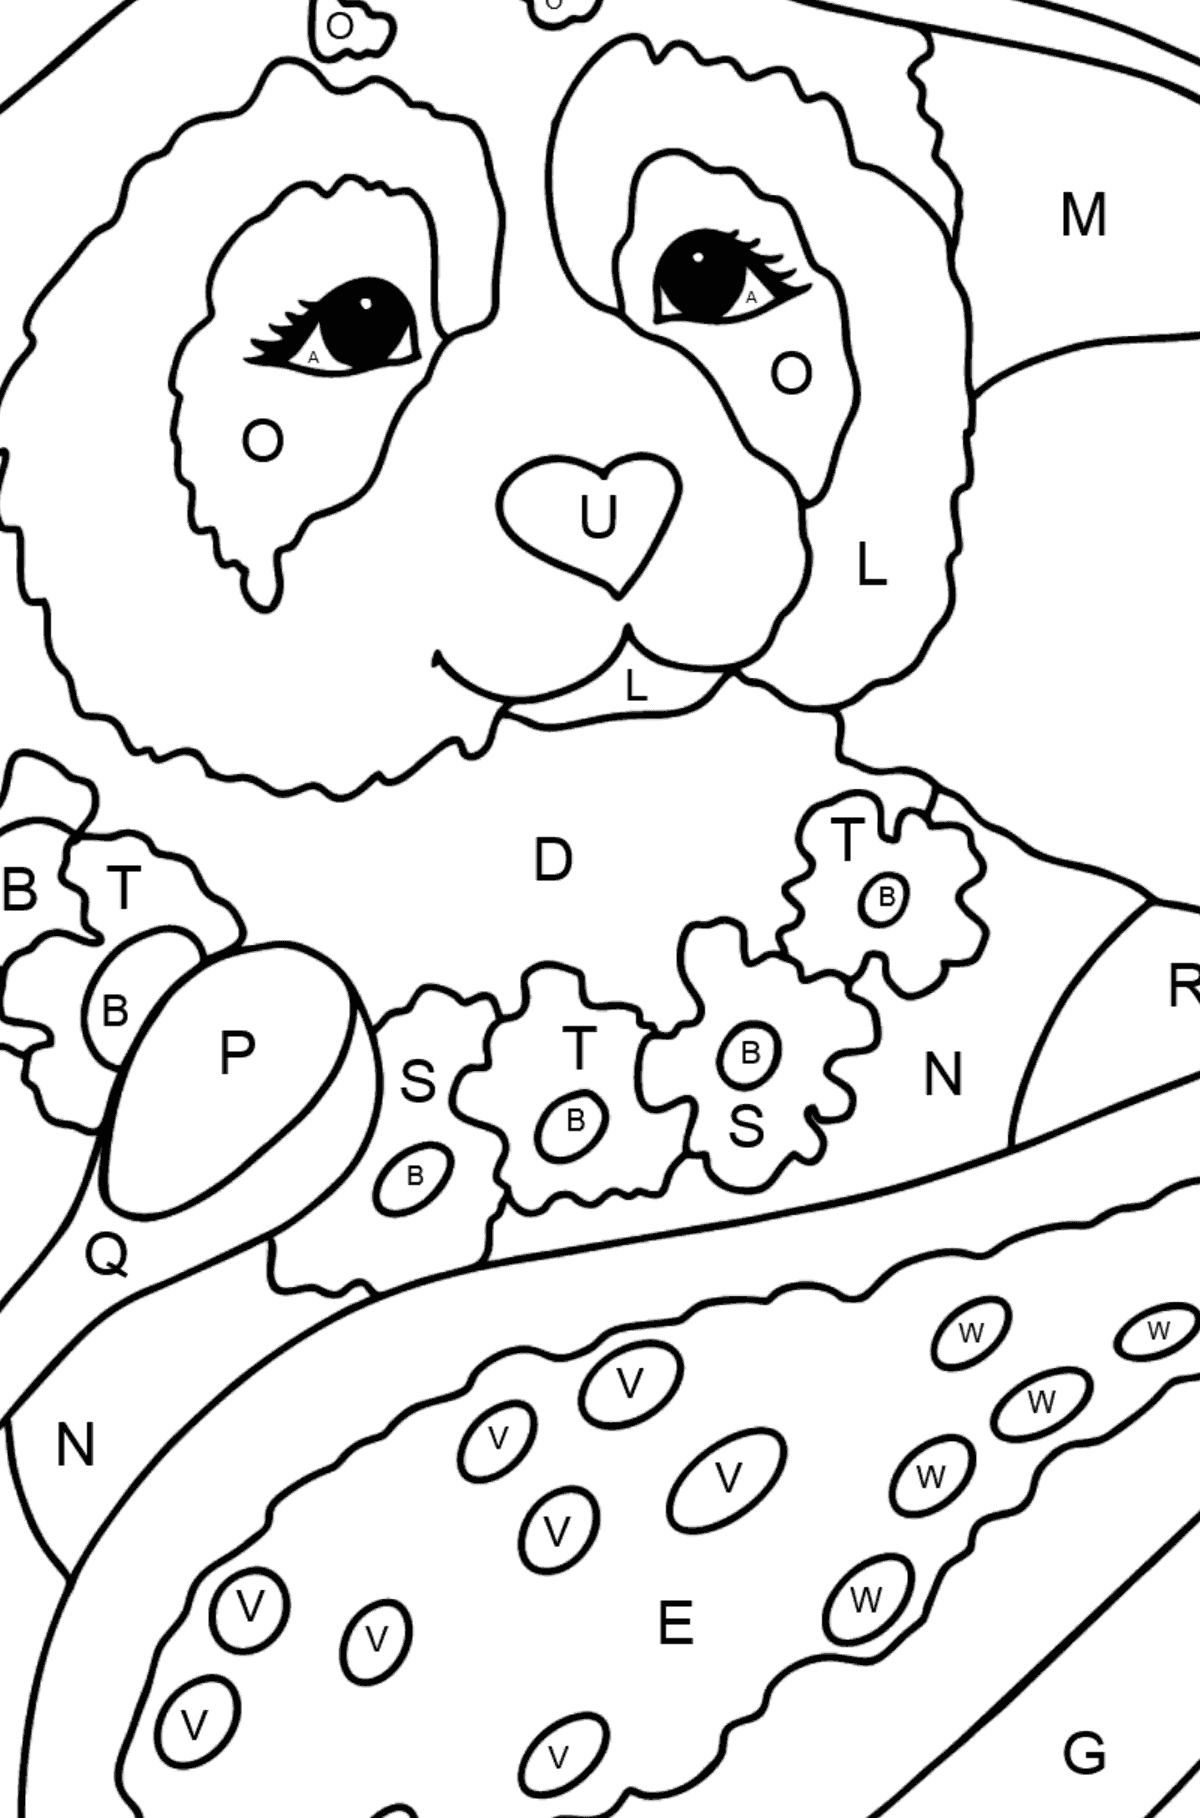 Cute Panda (Difficult) coloring page - Coloring by Letters for Kids